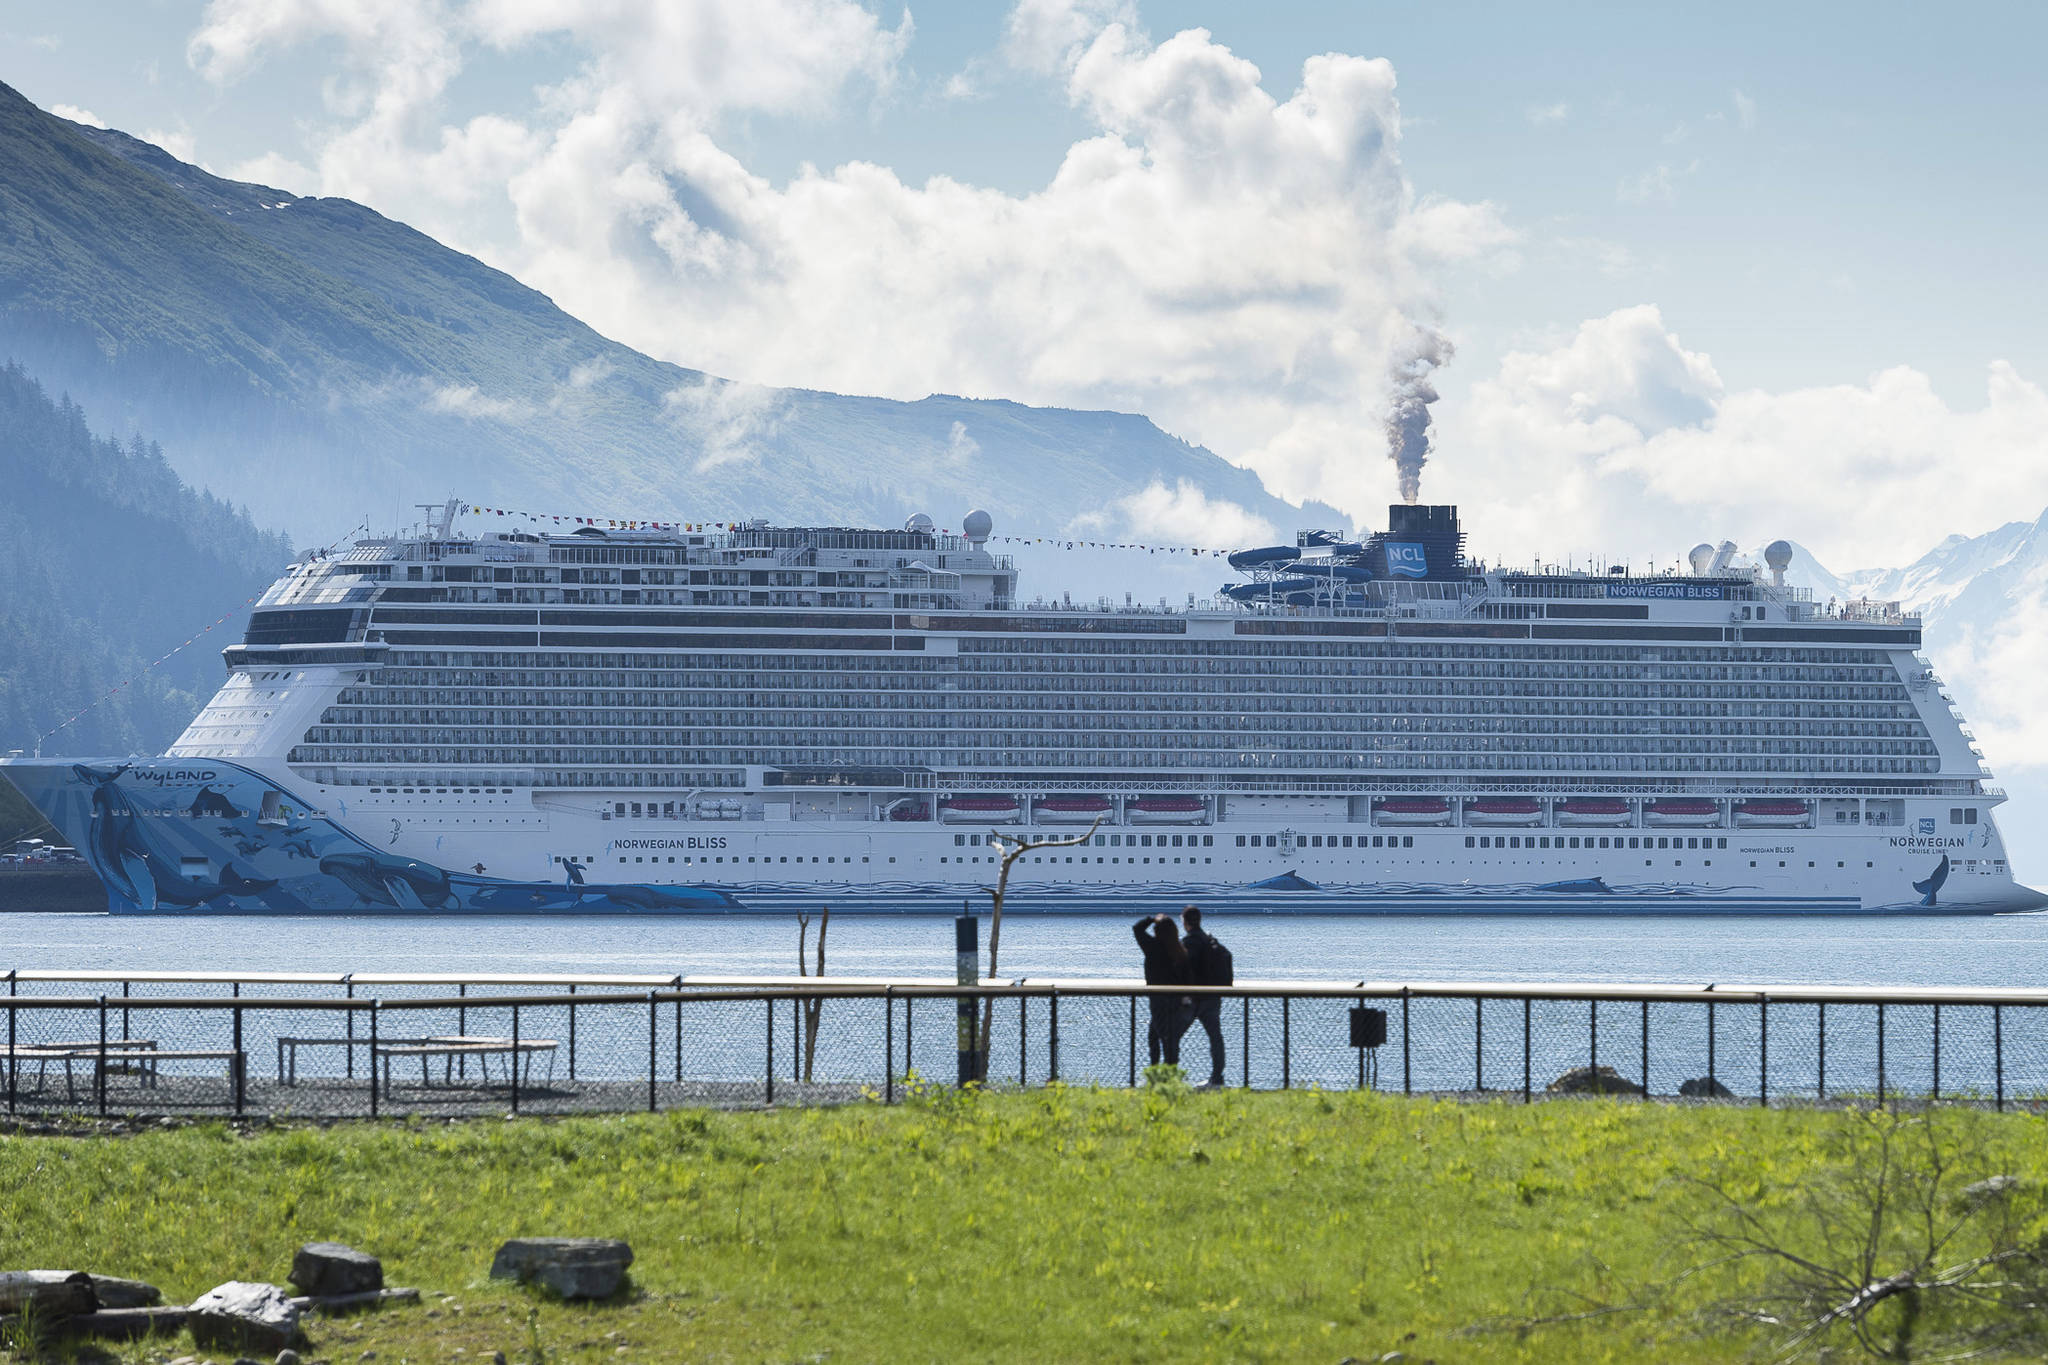 Opinion: Are Juneau city officials misleading the public about the cruise industry lawsuit?